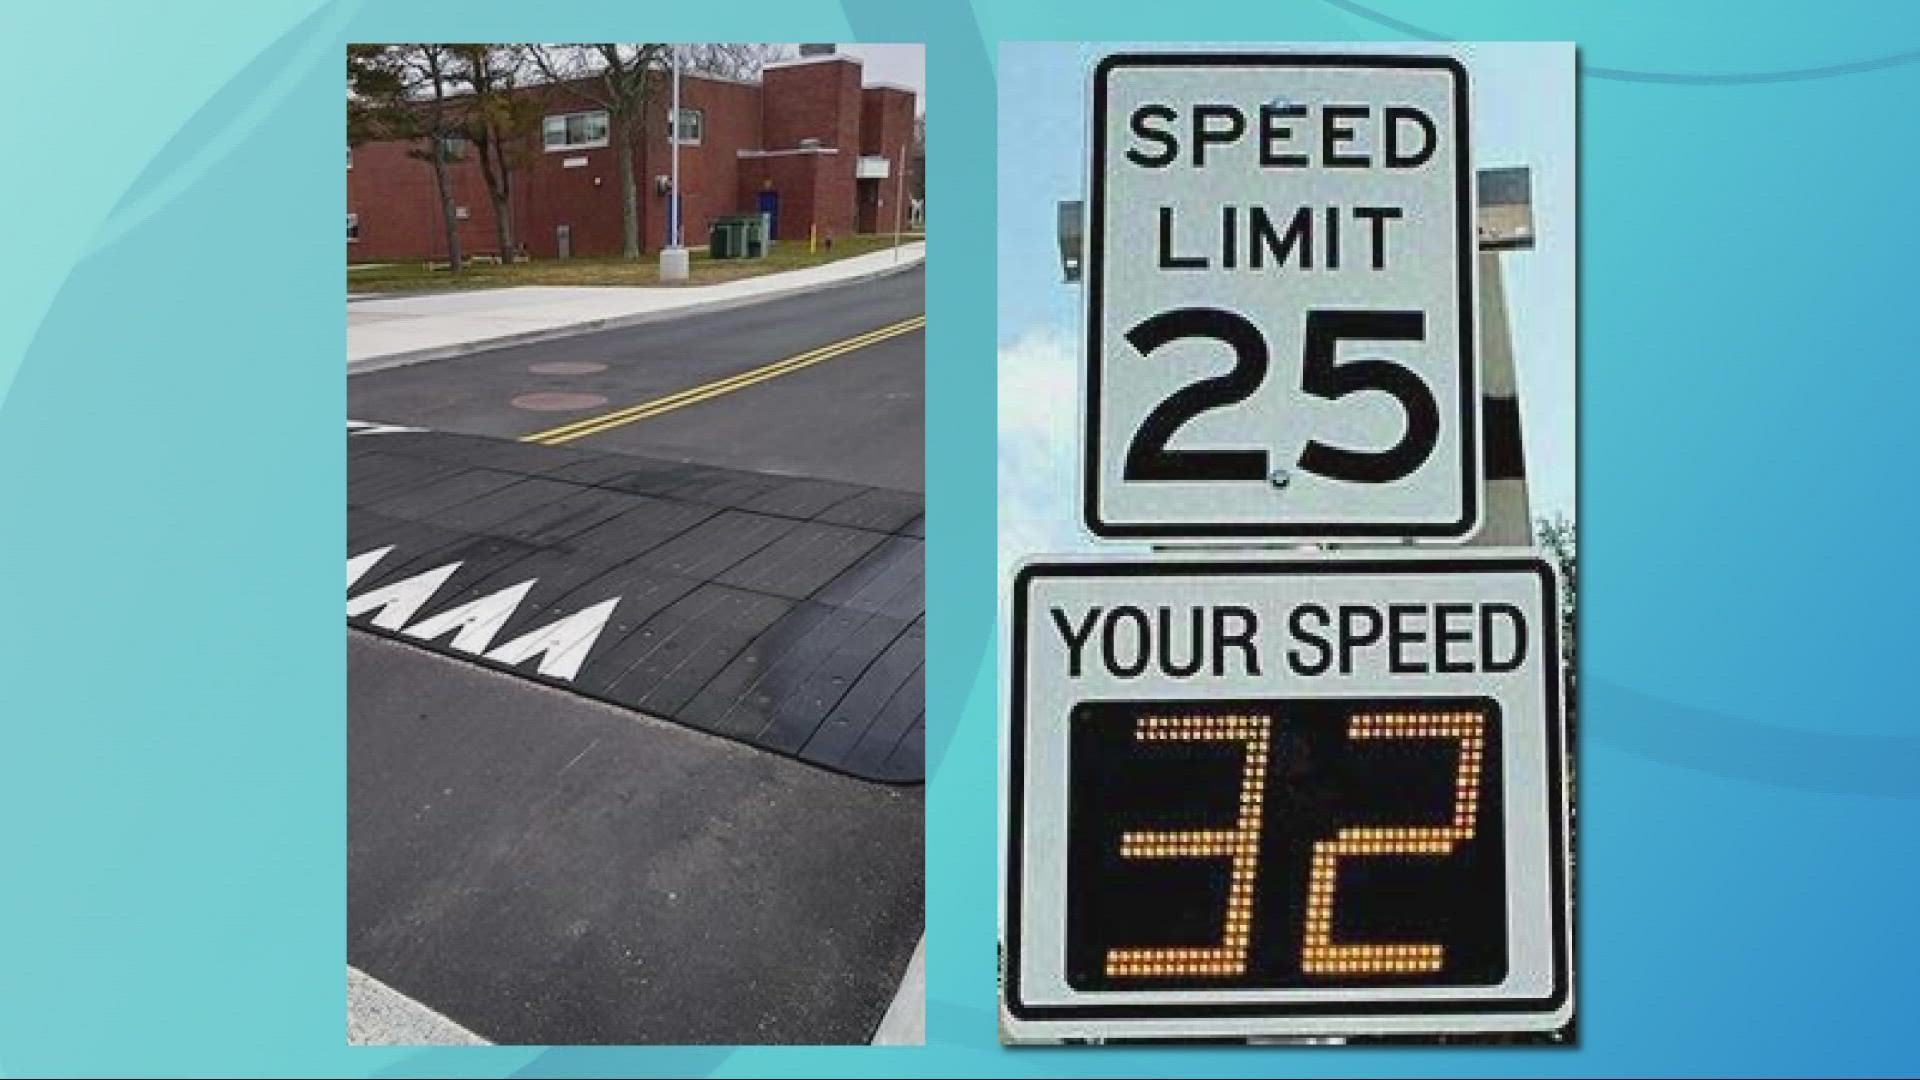 Ten radar speed feedback signs have been installed at strategic locations. The city will begin setting up rubber modular speed tables on nine residential roads.